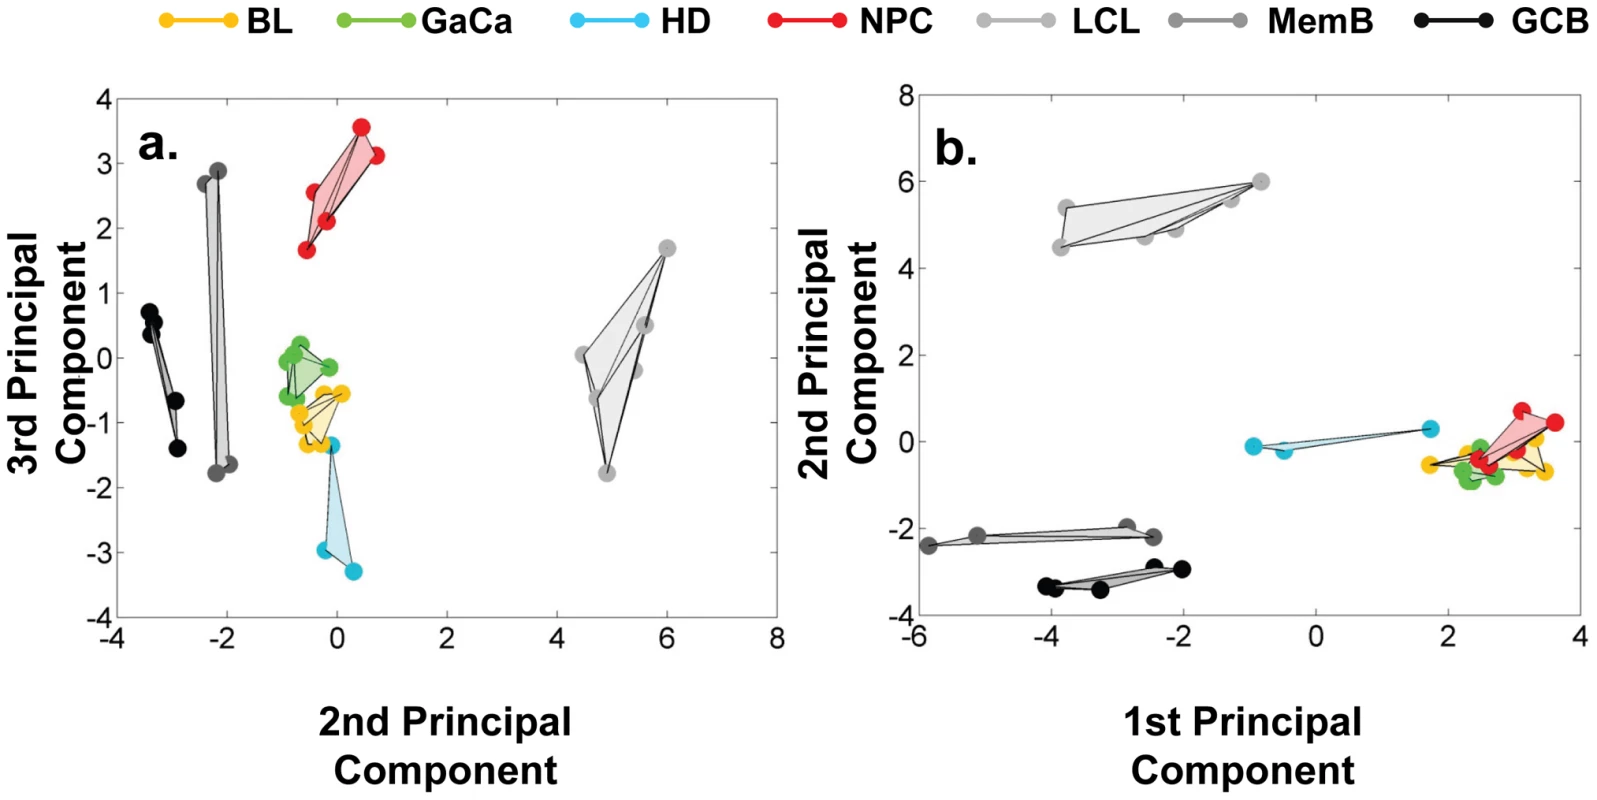 Principal component analysis (PCA) of miRNA expression in all tissues tested.